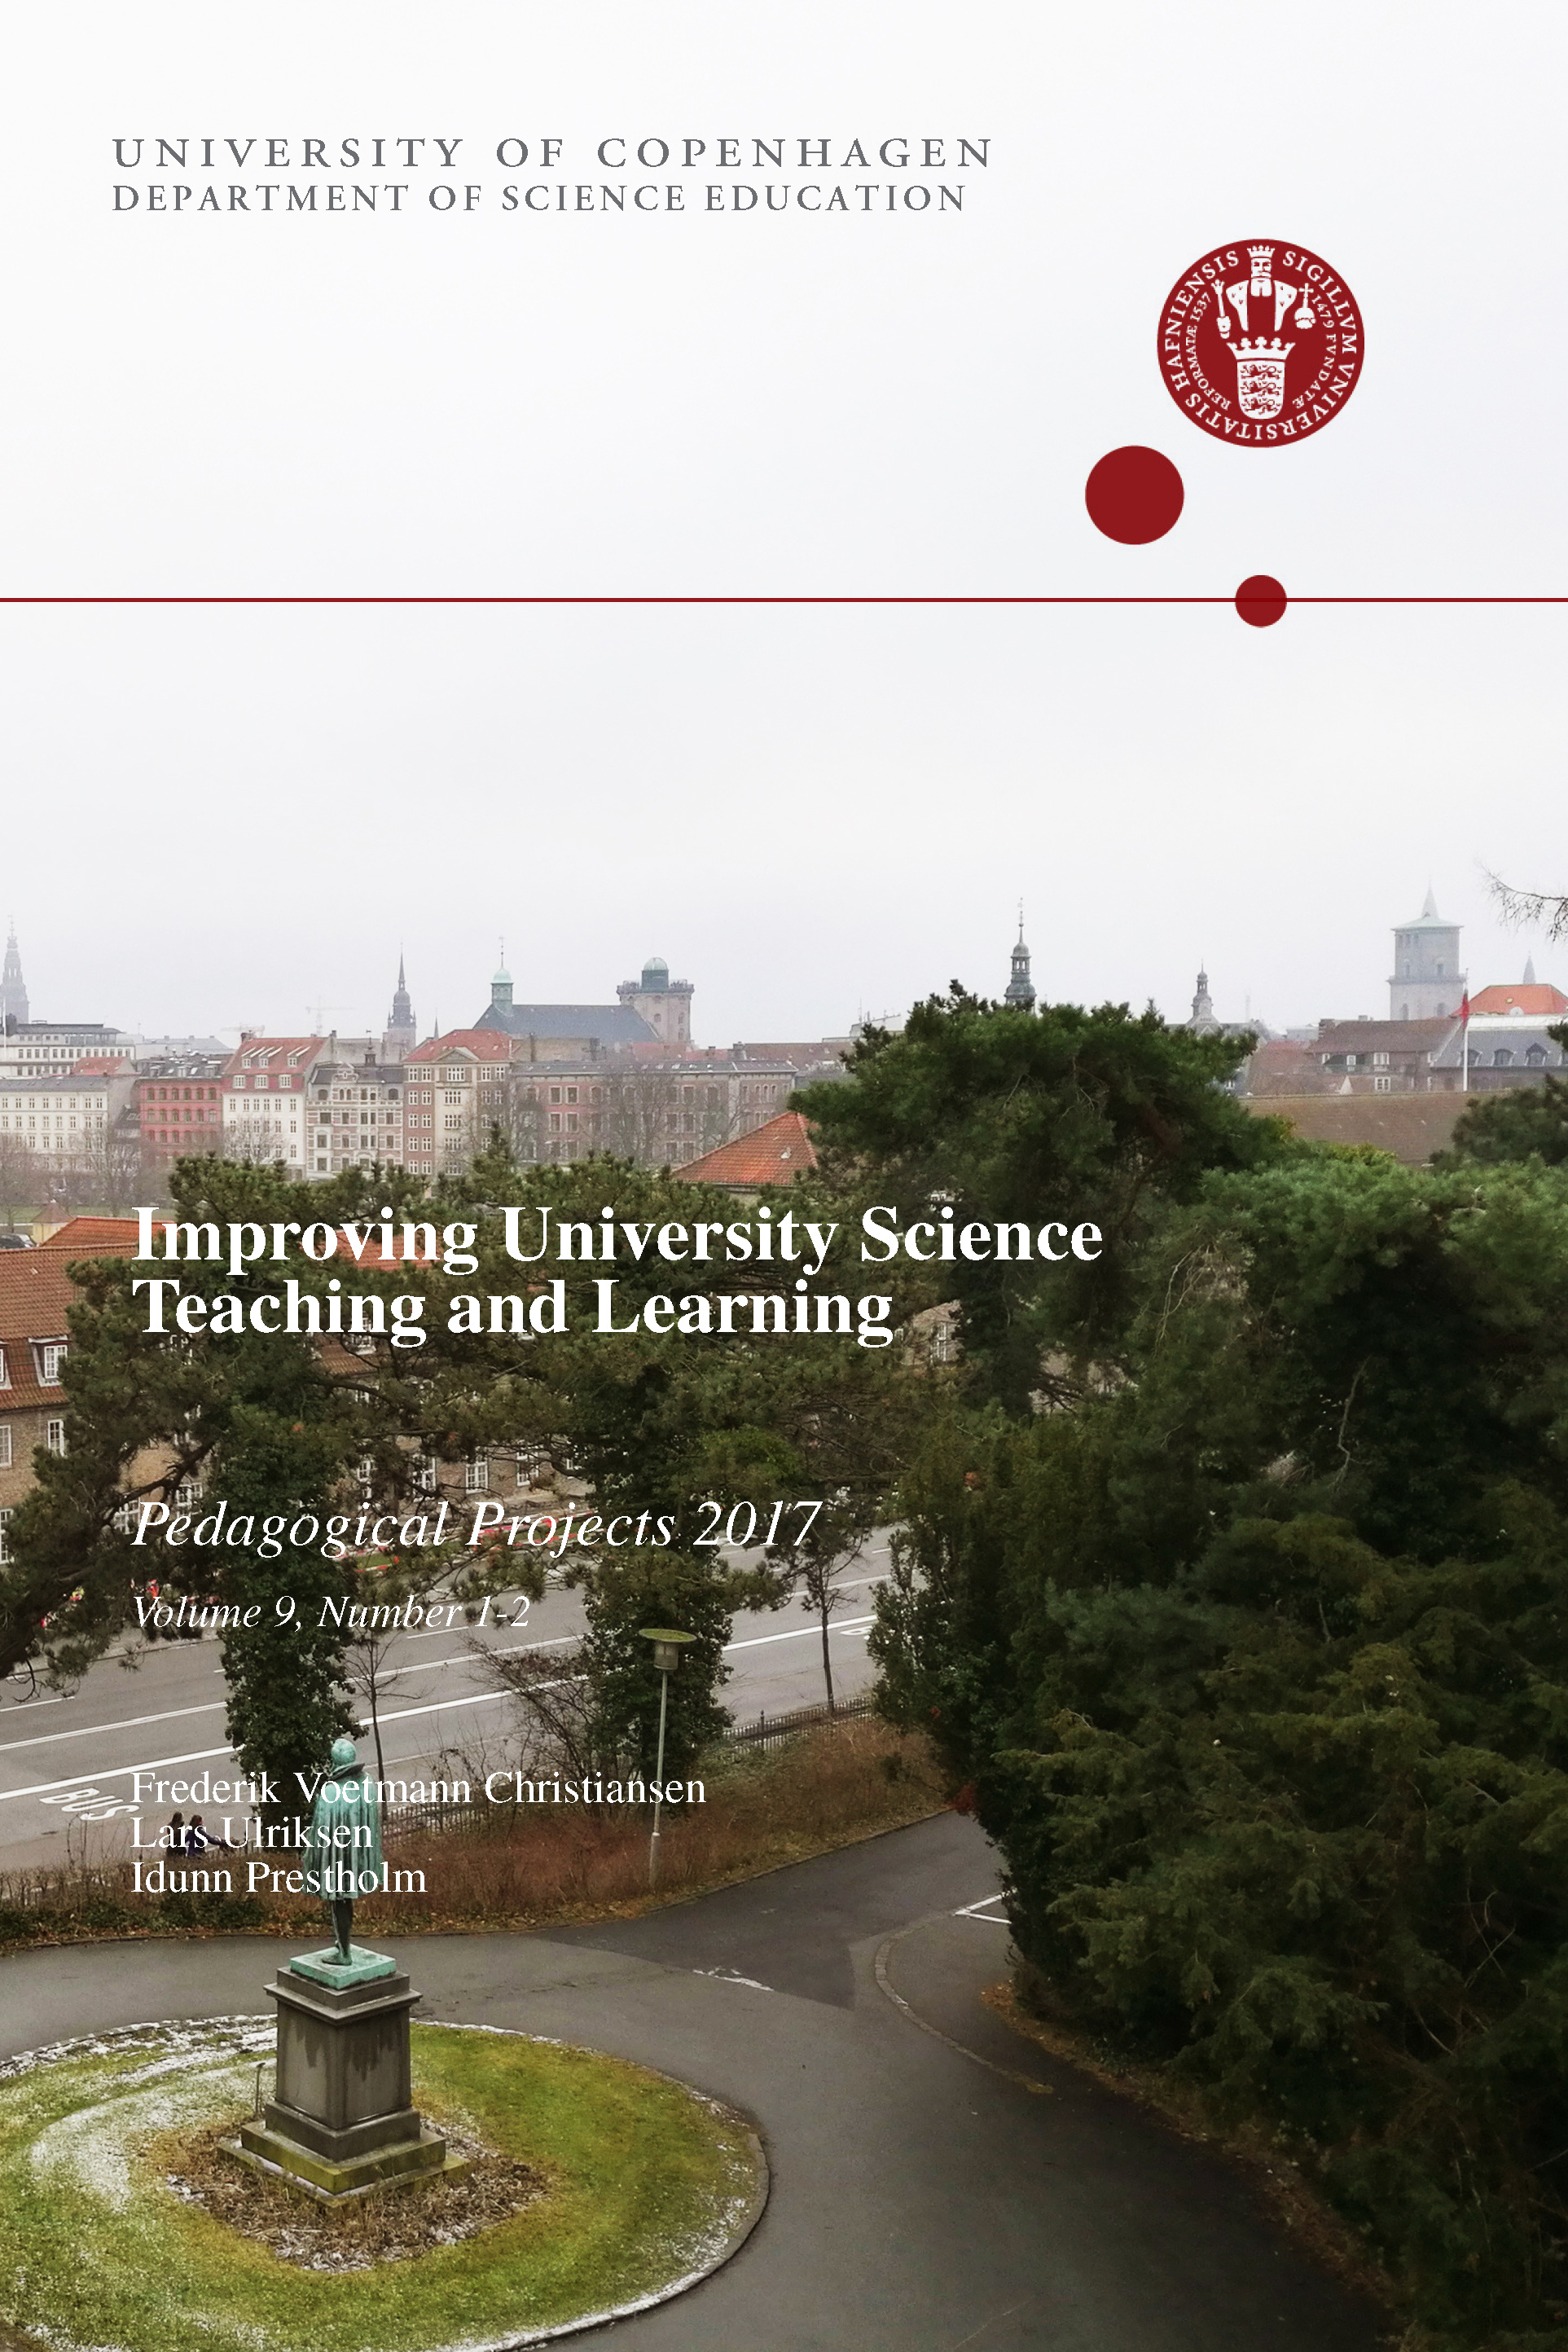 					Se Årg. 9 Nr. 1-2 (2017): Improving University Science Teaching and Learning - Pedagogical Projects 2017
				